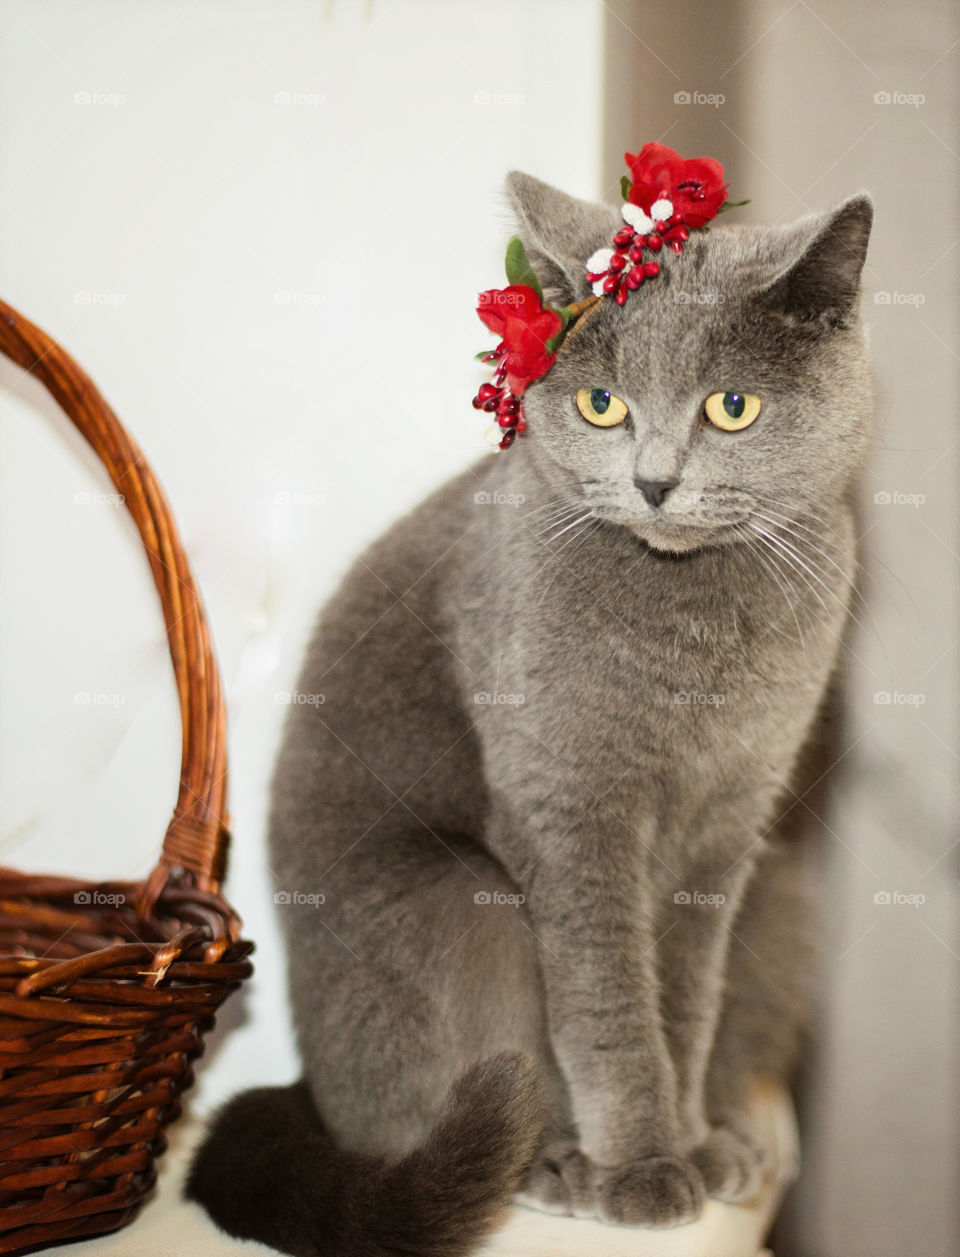 cat with a wreath of flowers